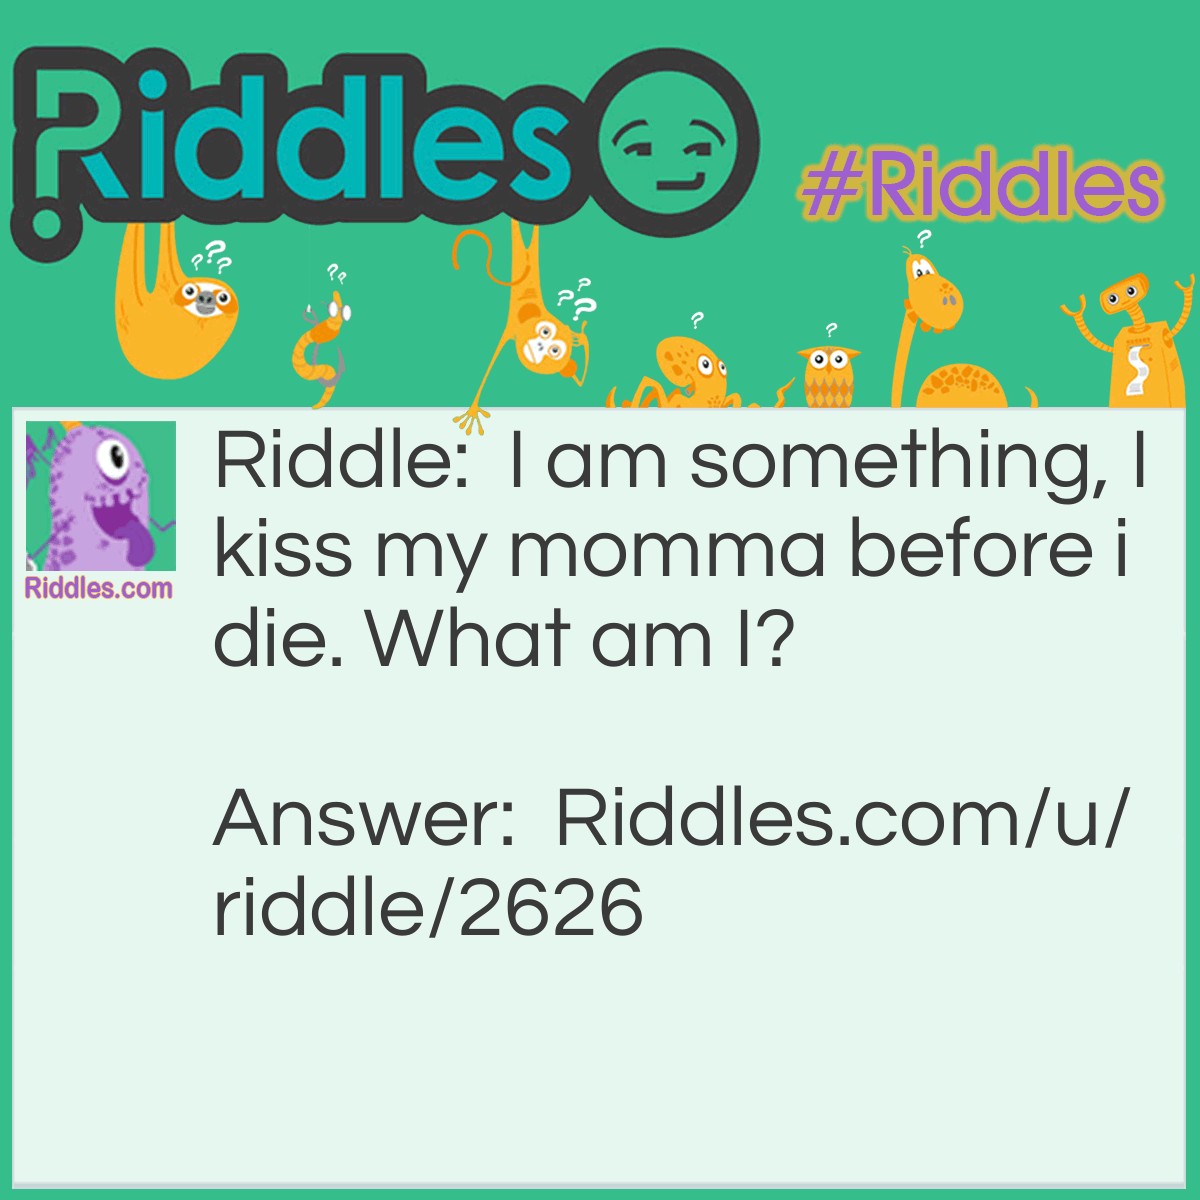 Riddle: I am something, I kiss my momma before i die. What am I? Answer: A matchstick.